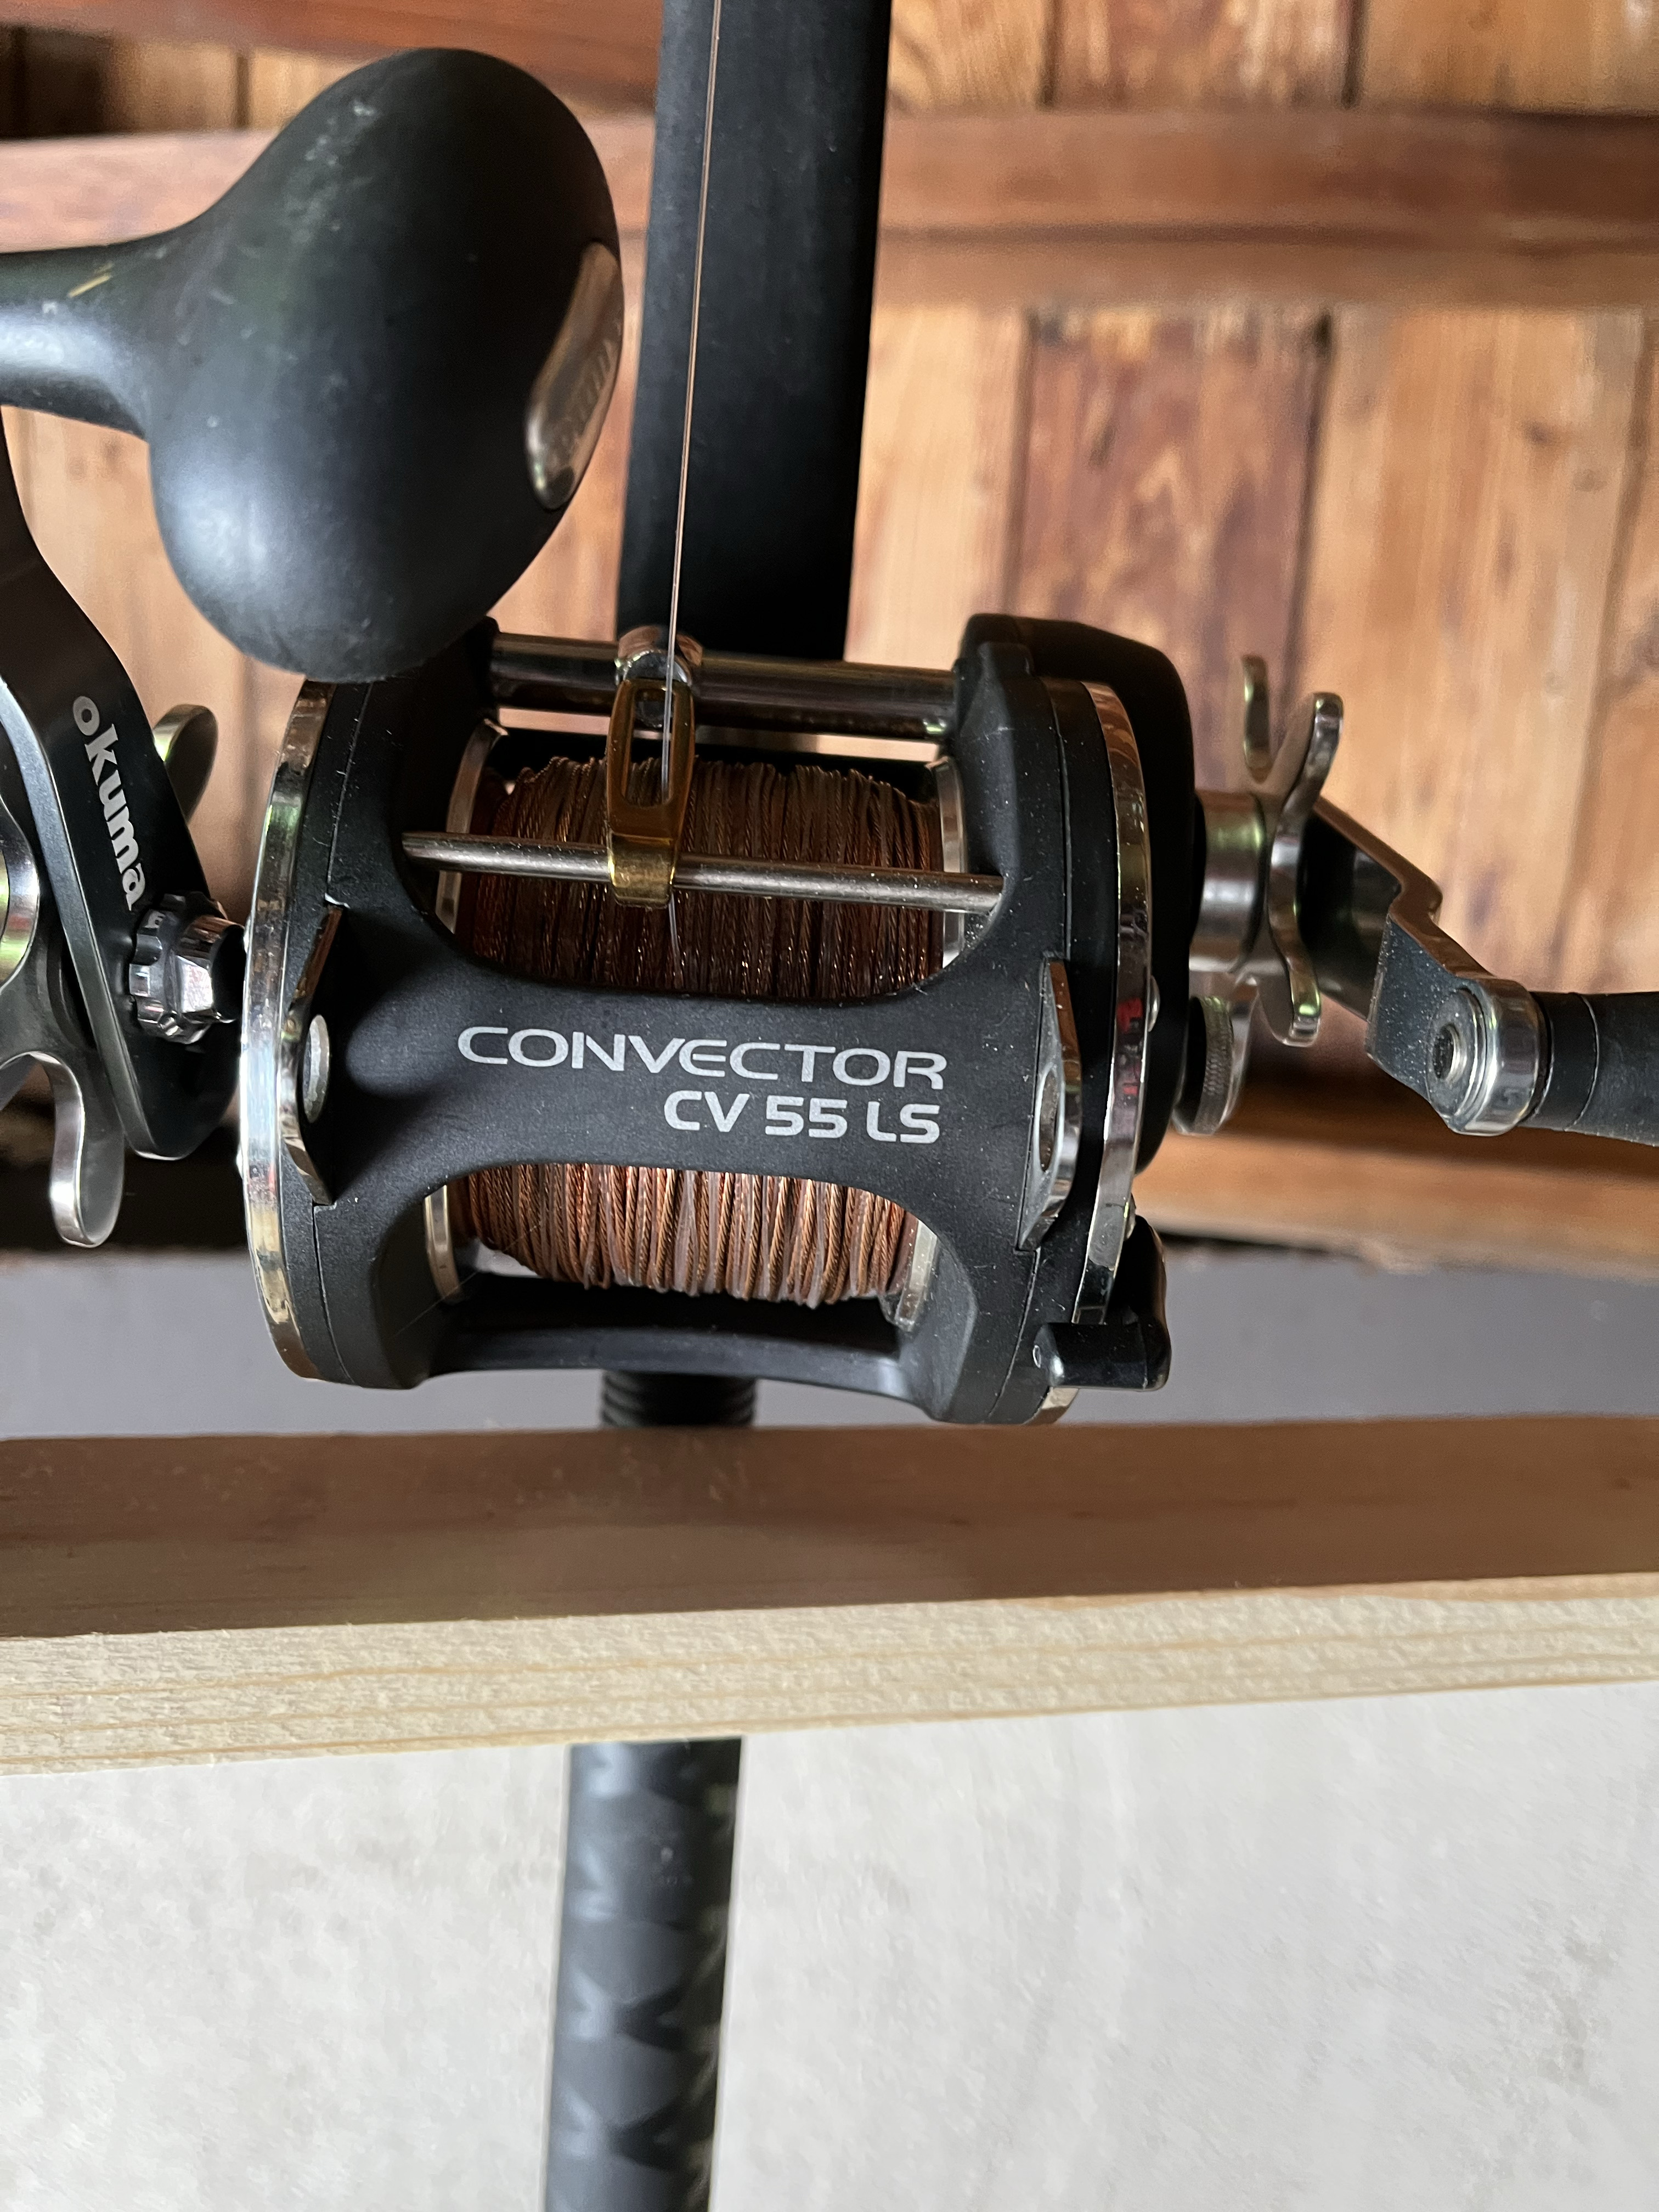 For Sale- 200 & 300 copper combos - Classifieds - Buy, Sell, Trade or Rent  - Lake Ontario United - Lake Ontario's Largest Fishing & Hunting Community  - New York and Ontario Canada